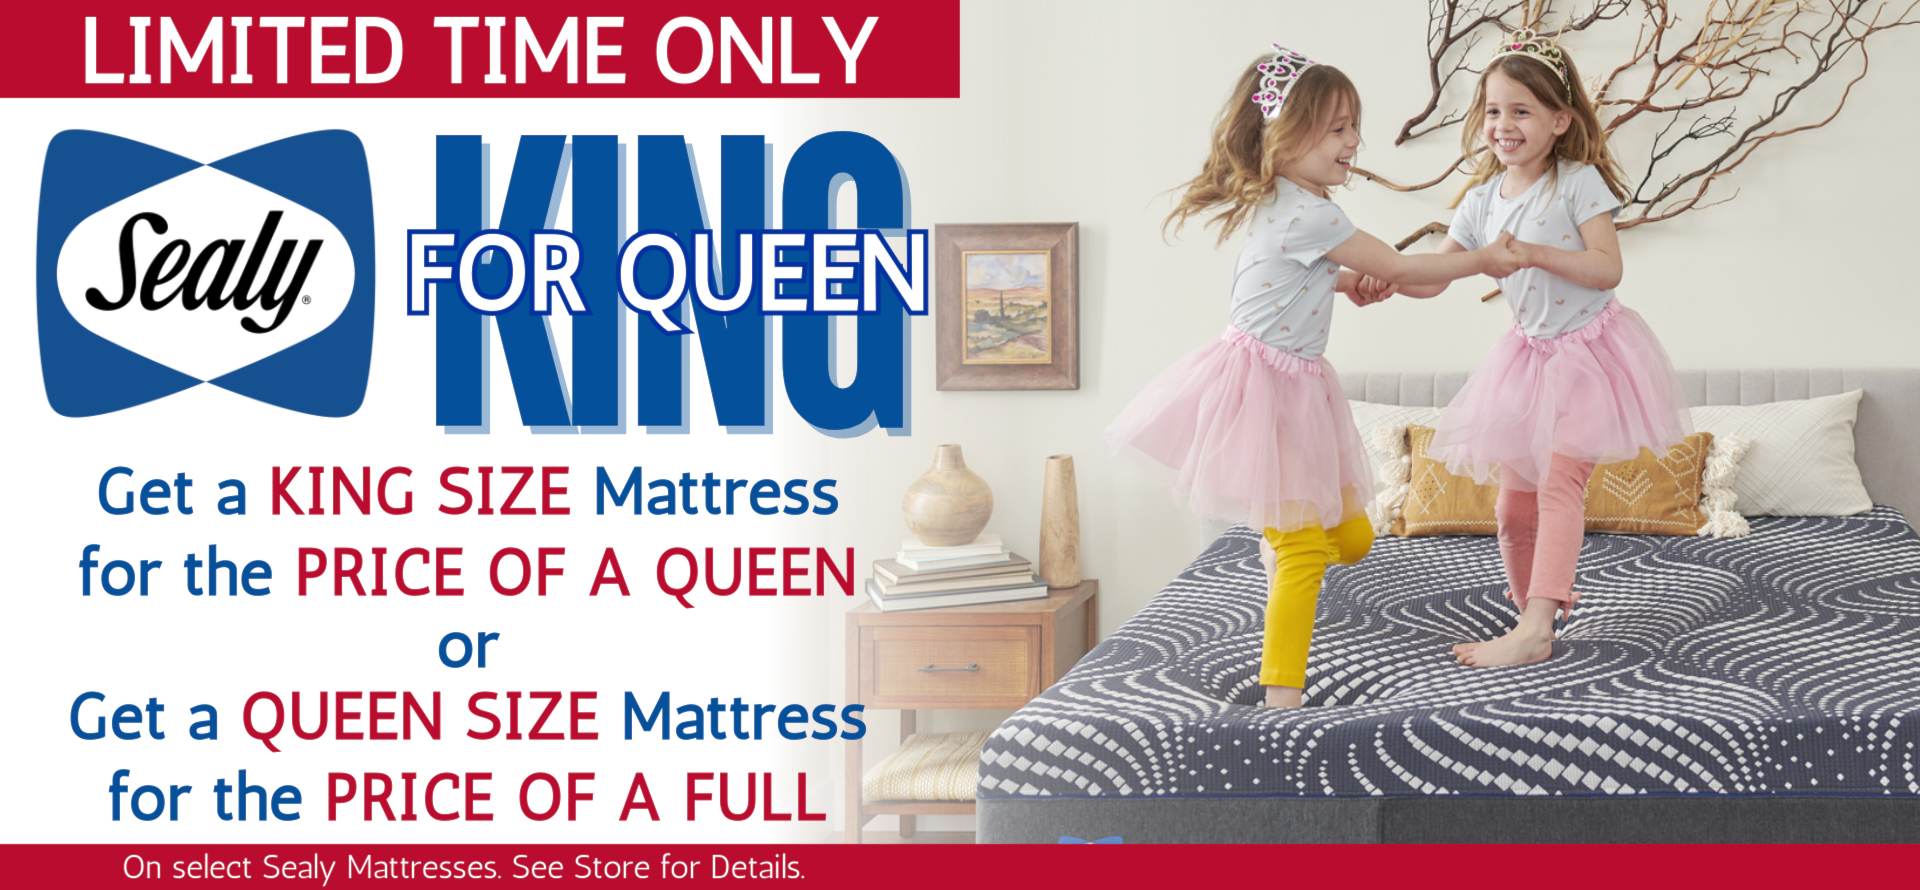 Sealy Mattress King Size for a Queen Price